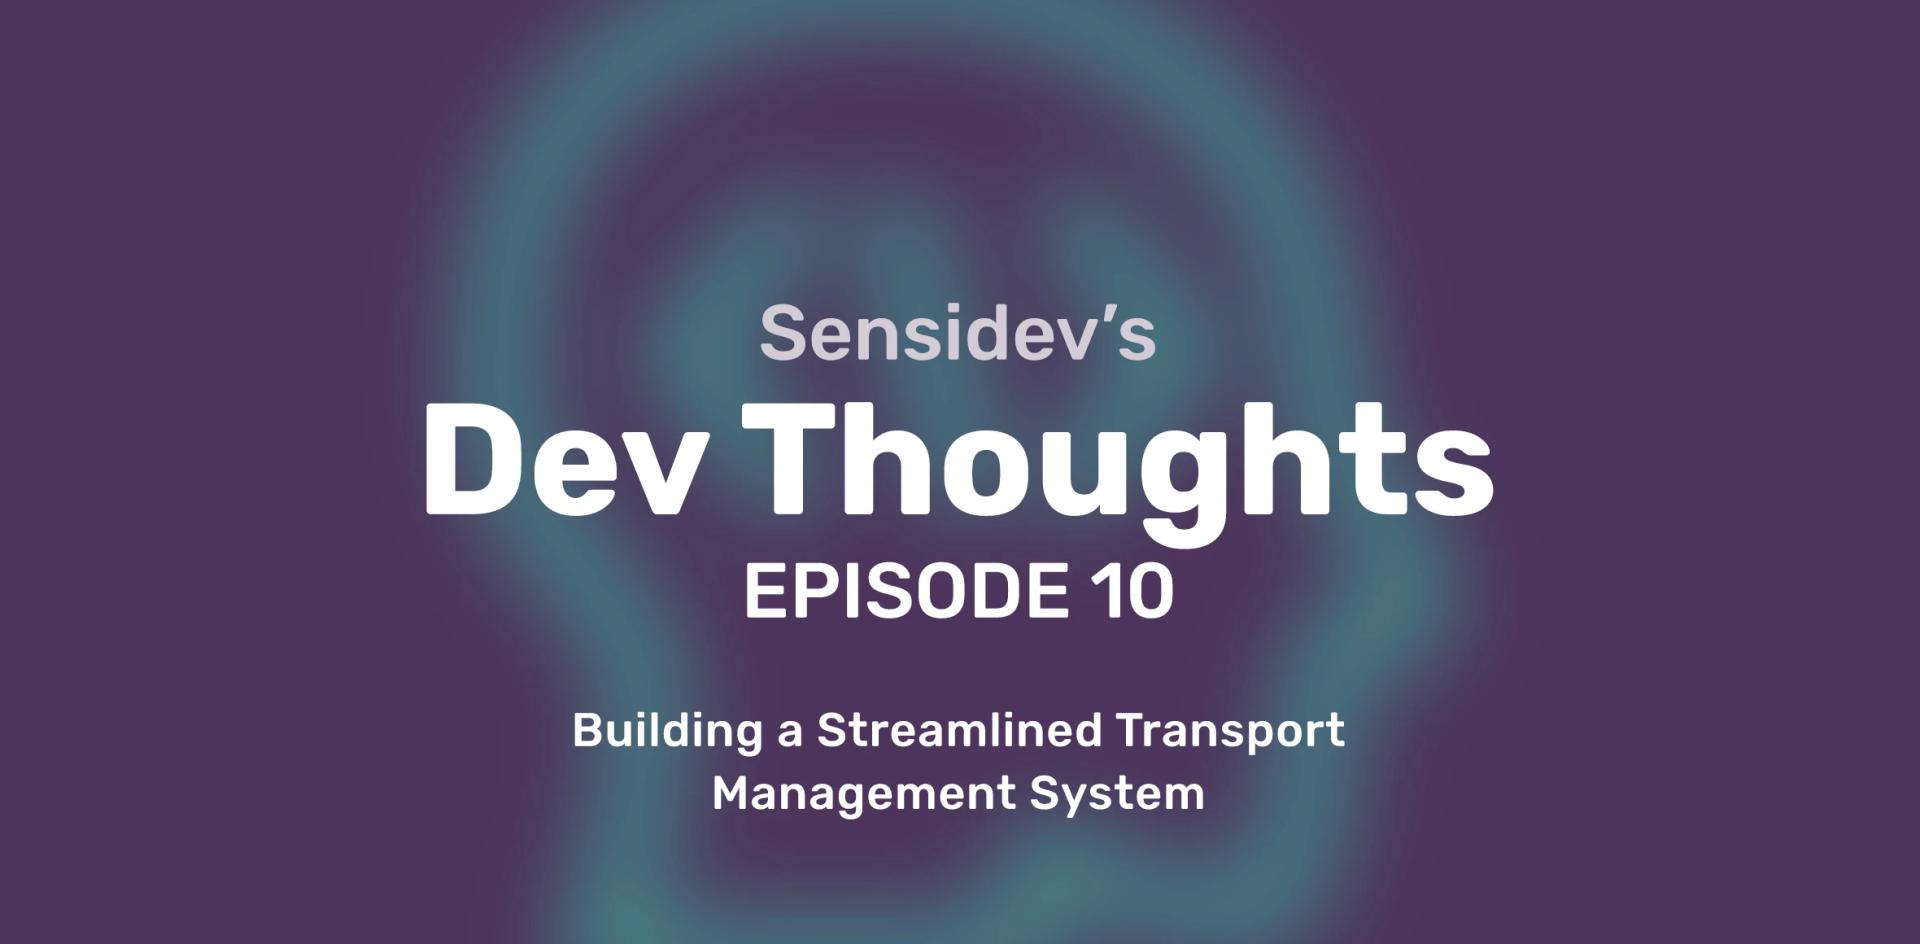 The Product Owner’s View Building a Streamlined Transport Management System